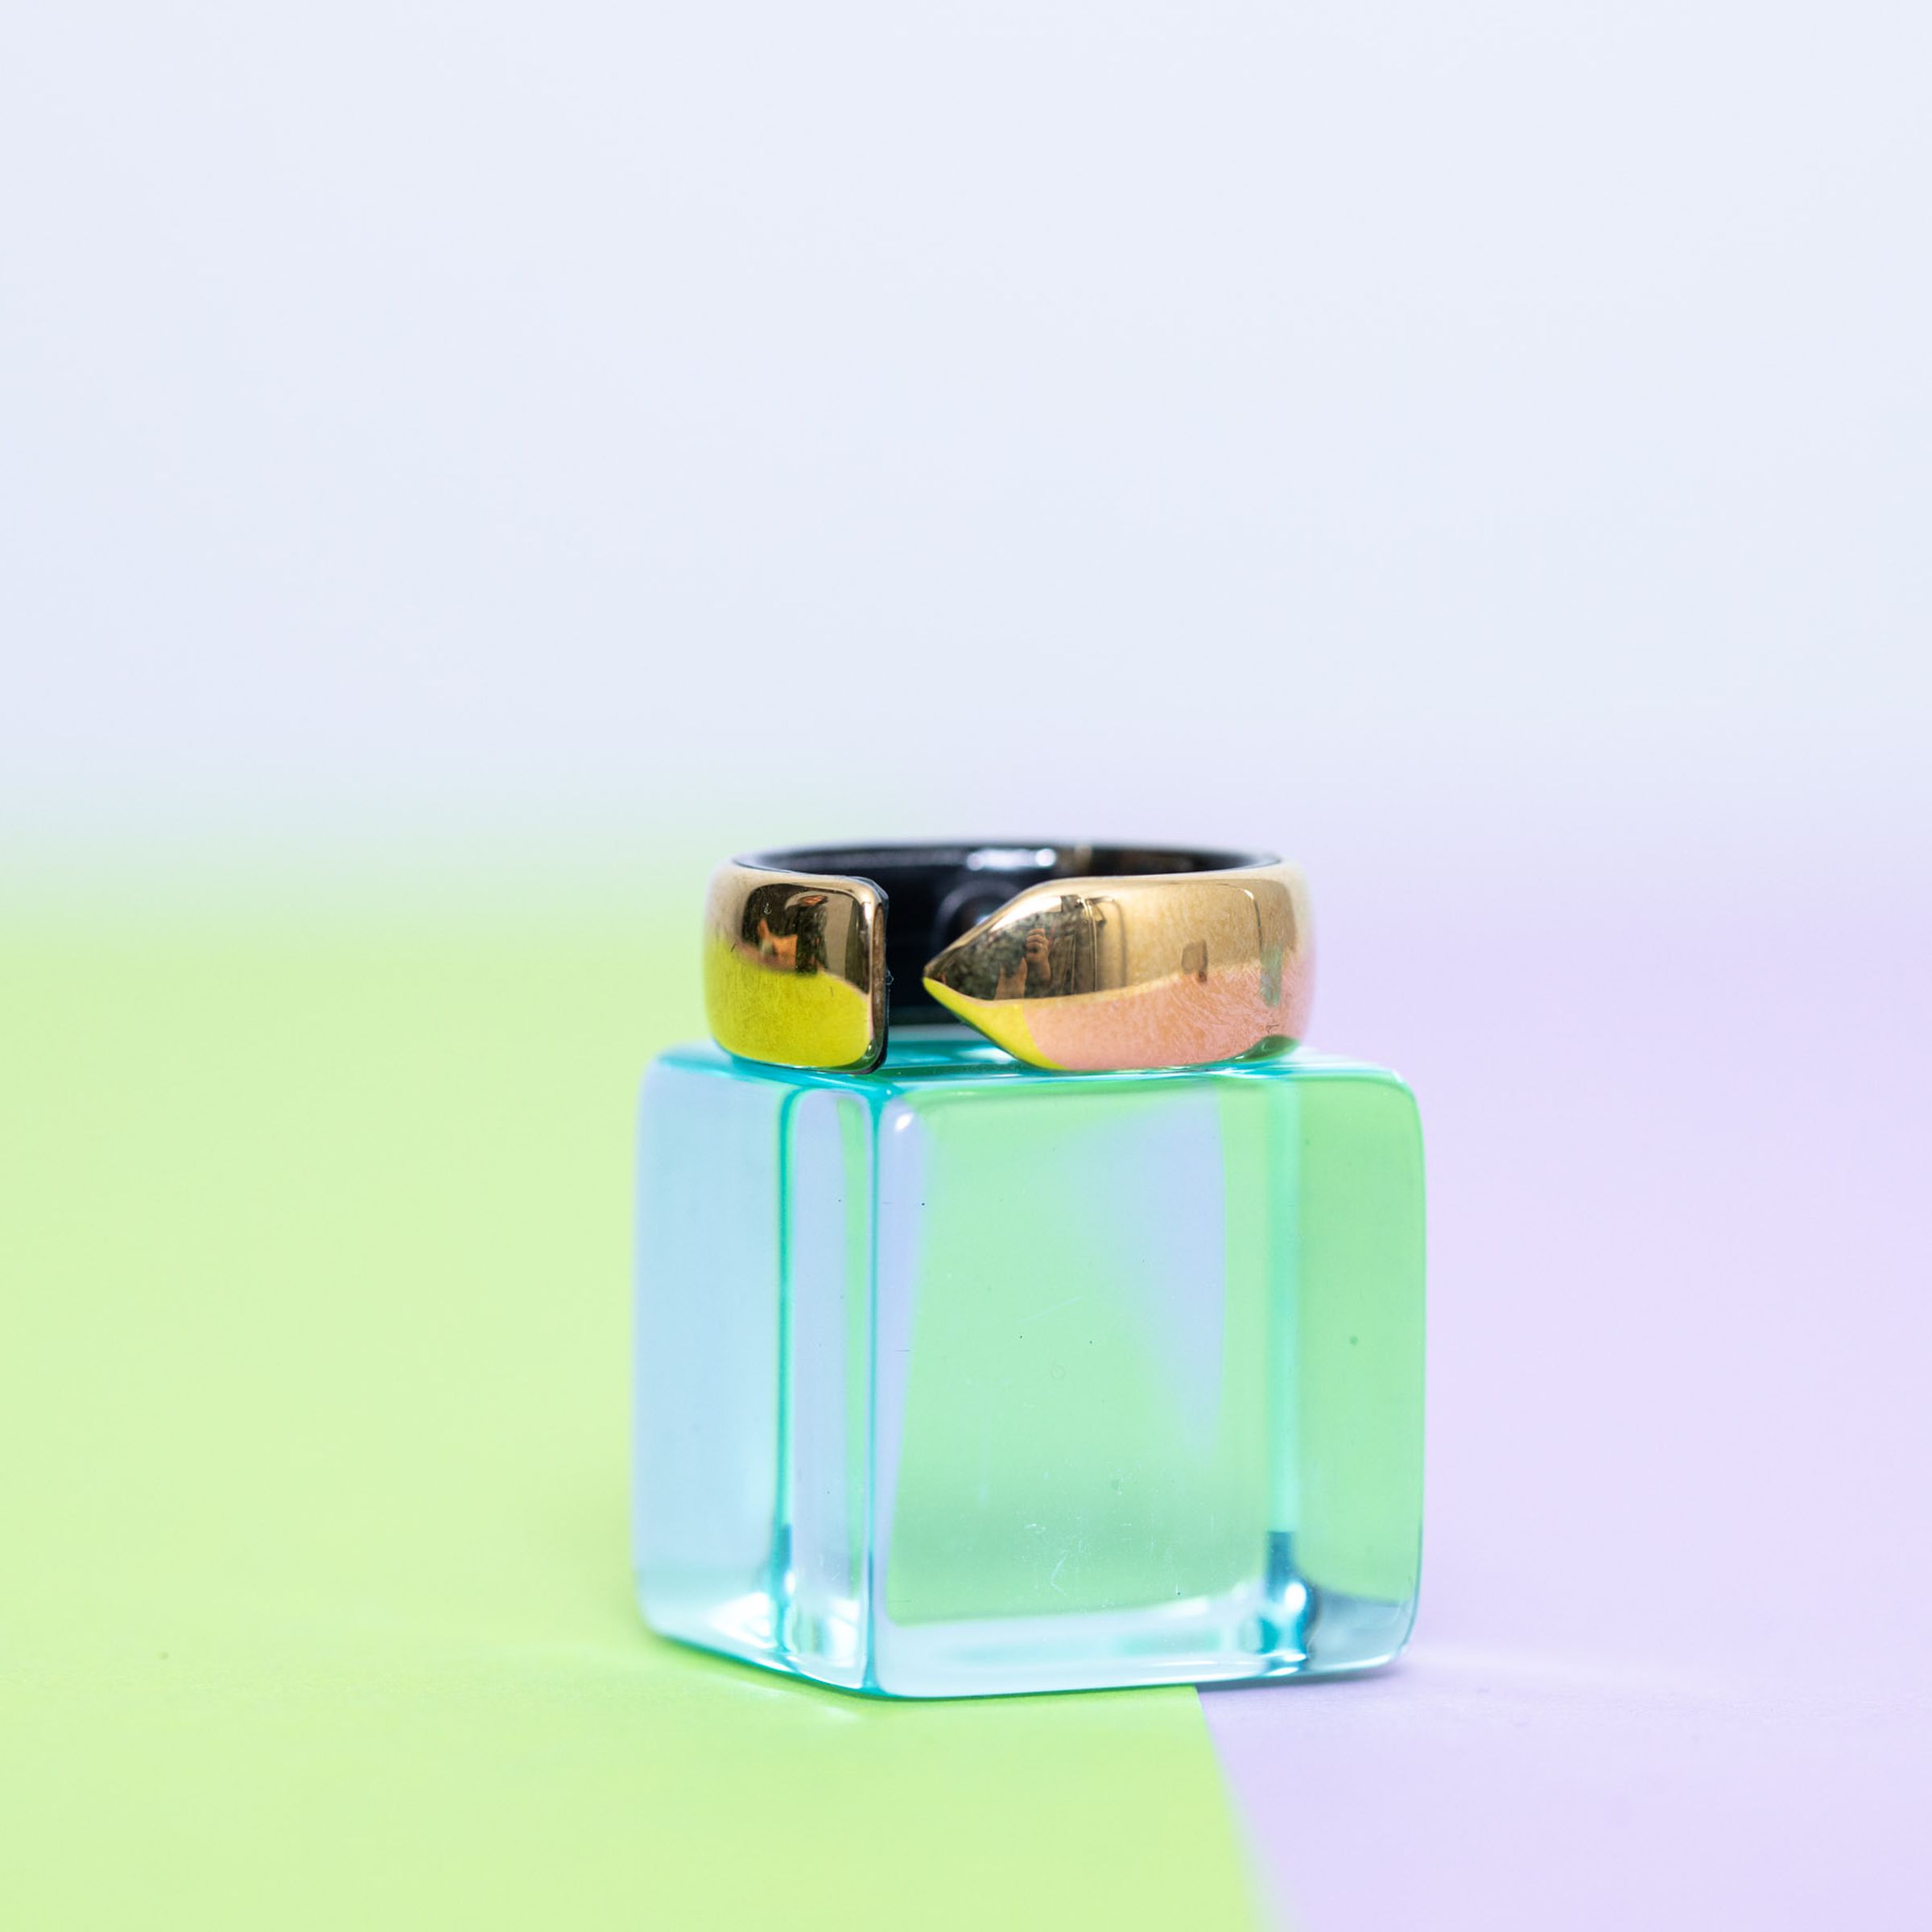 The Evie Ring on top of a clear blue block on top of a pastel green and purple background.